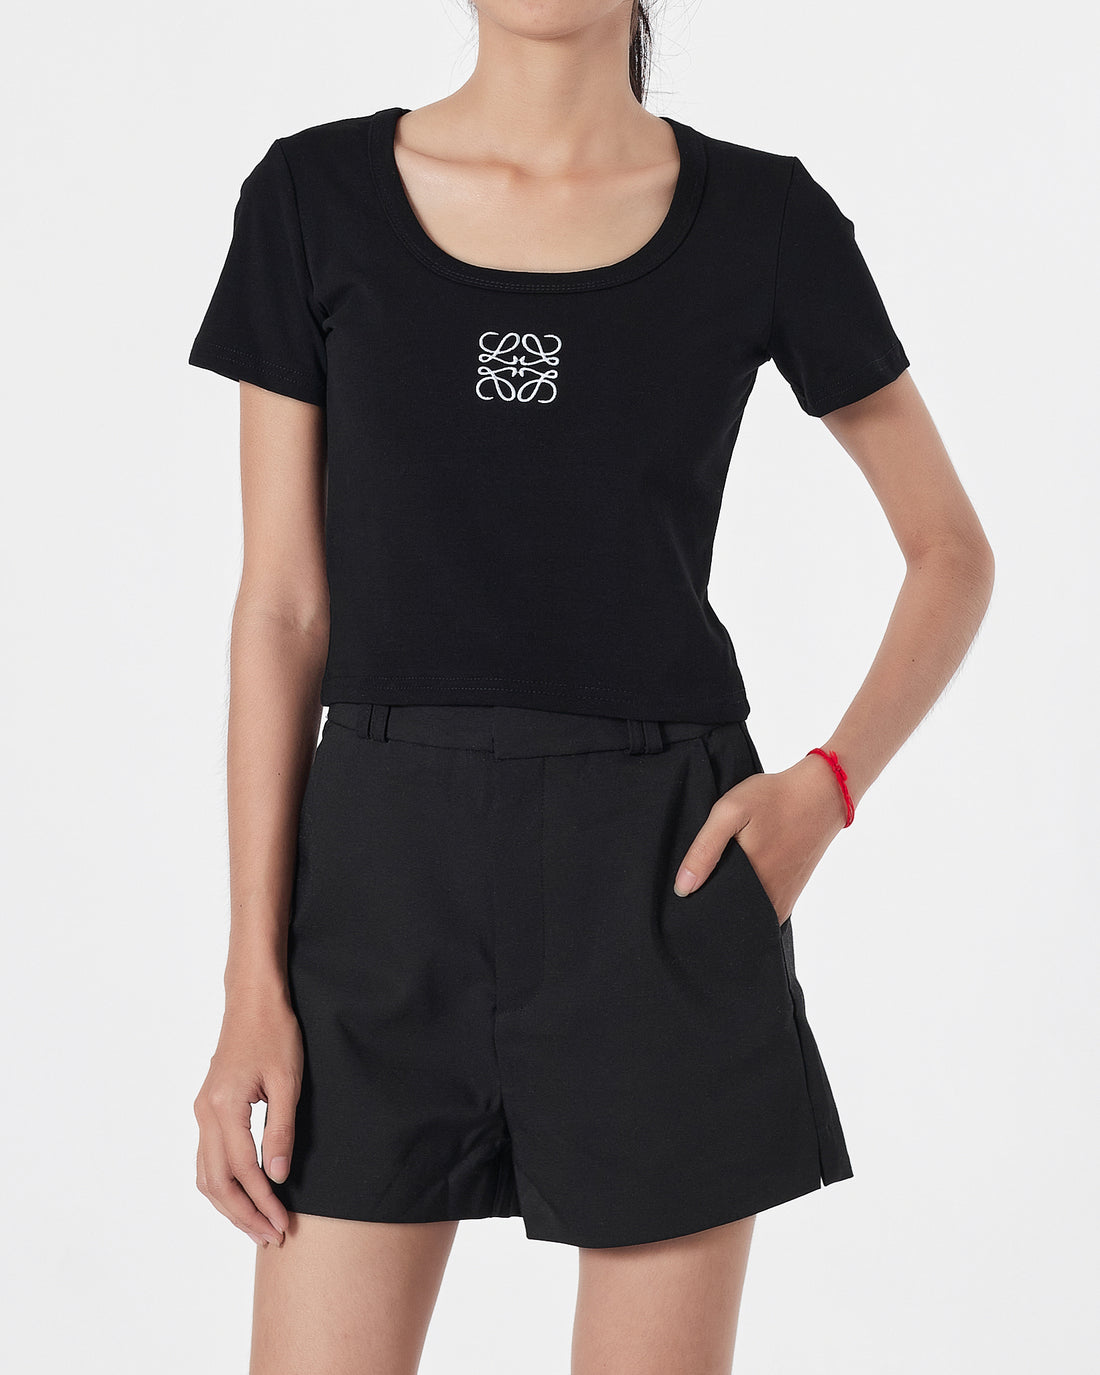 LOW Logo Embroidered Lady Black T-Shirt Crop Top 10.90